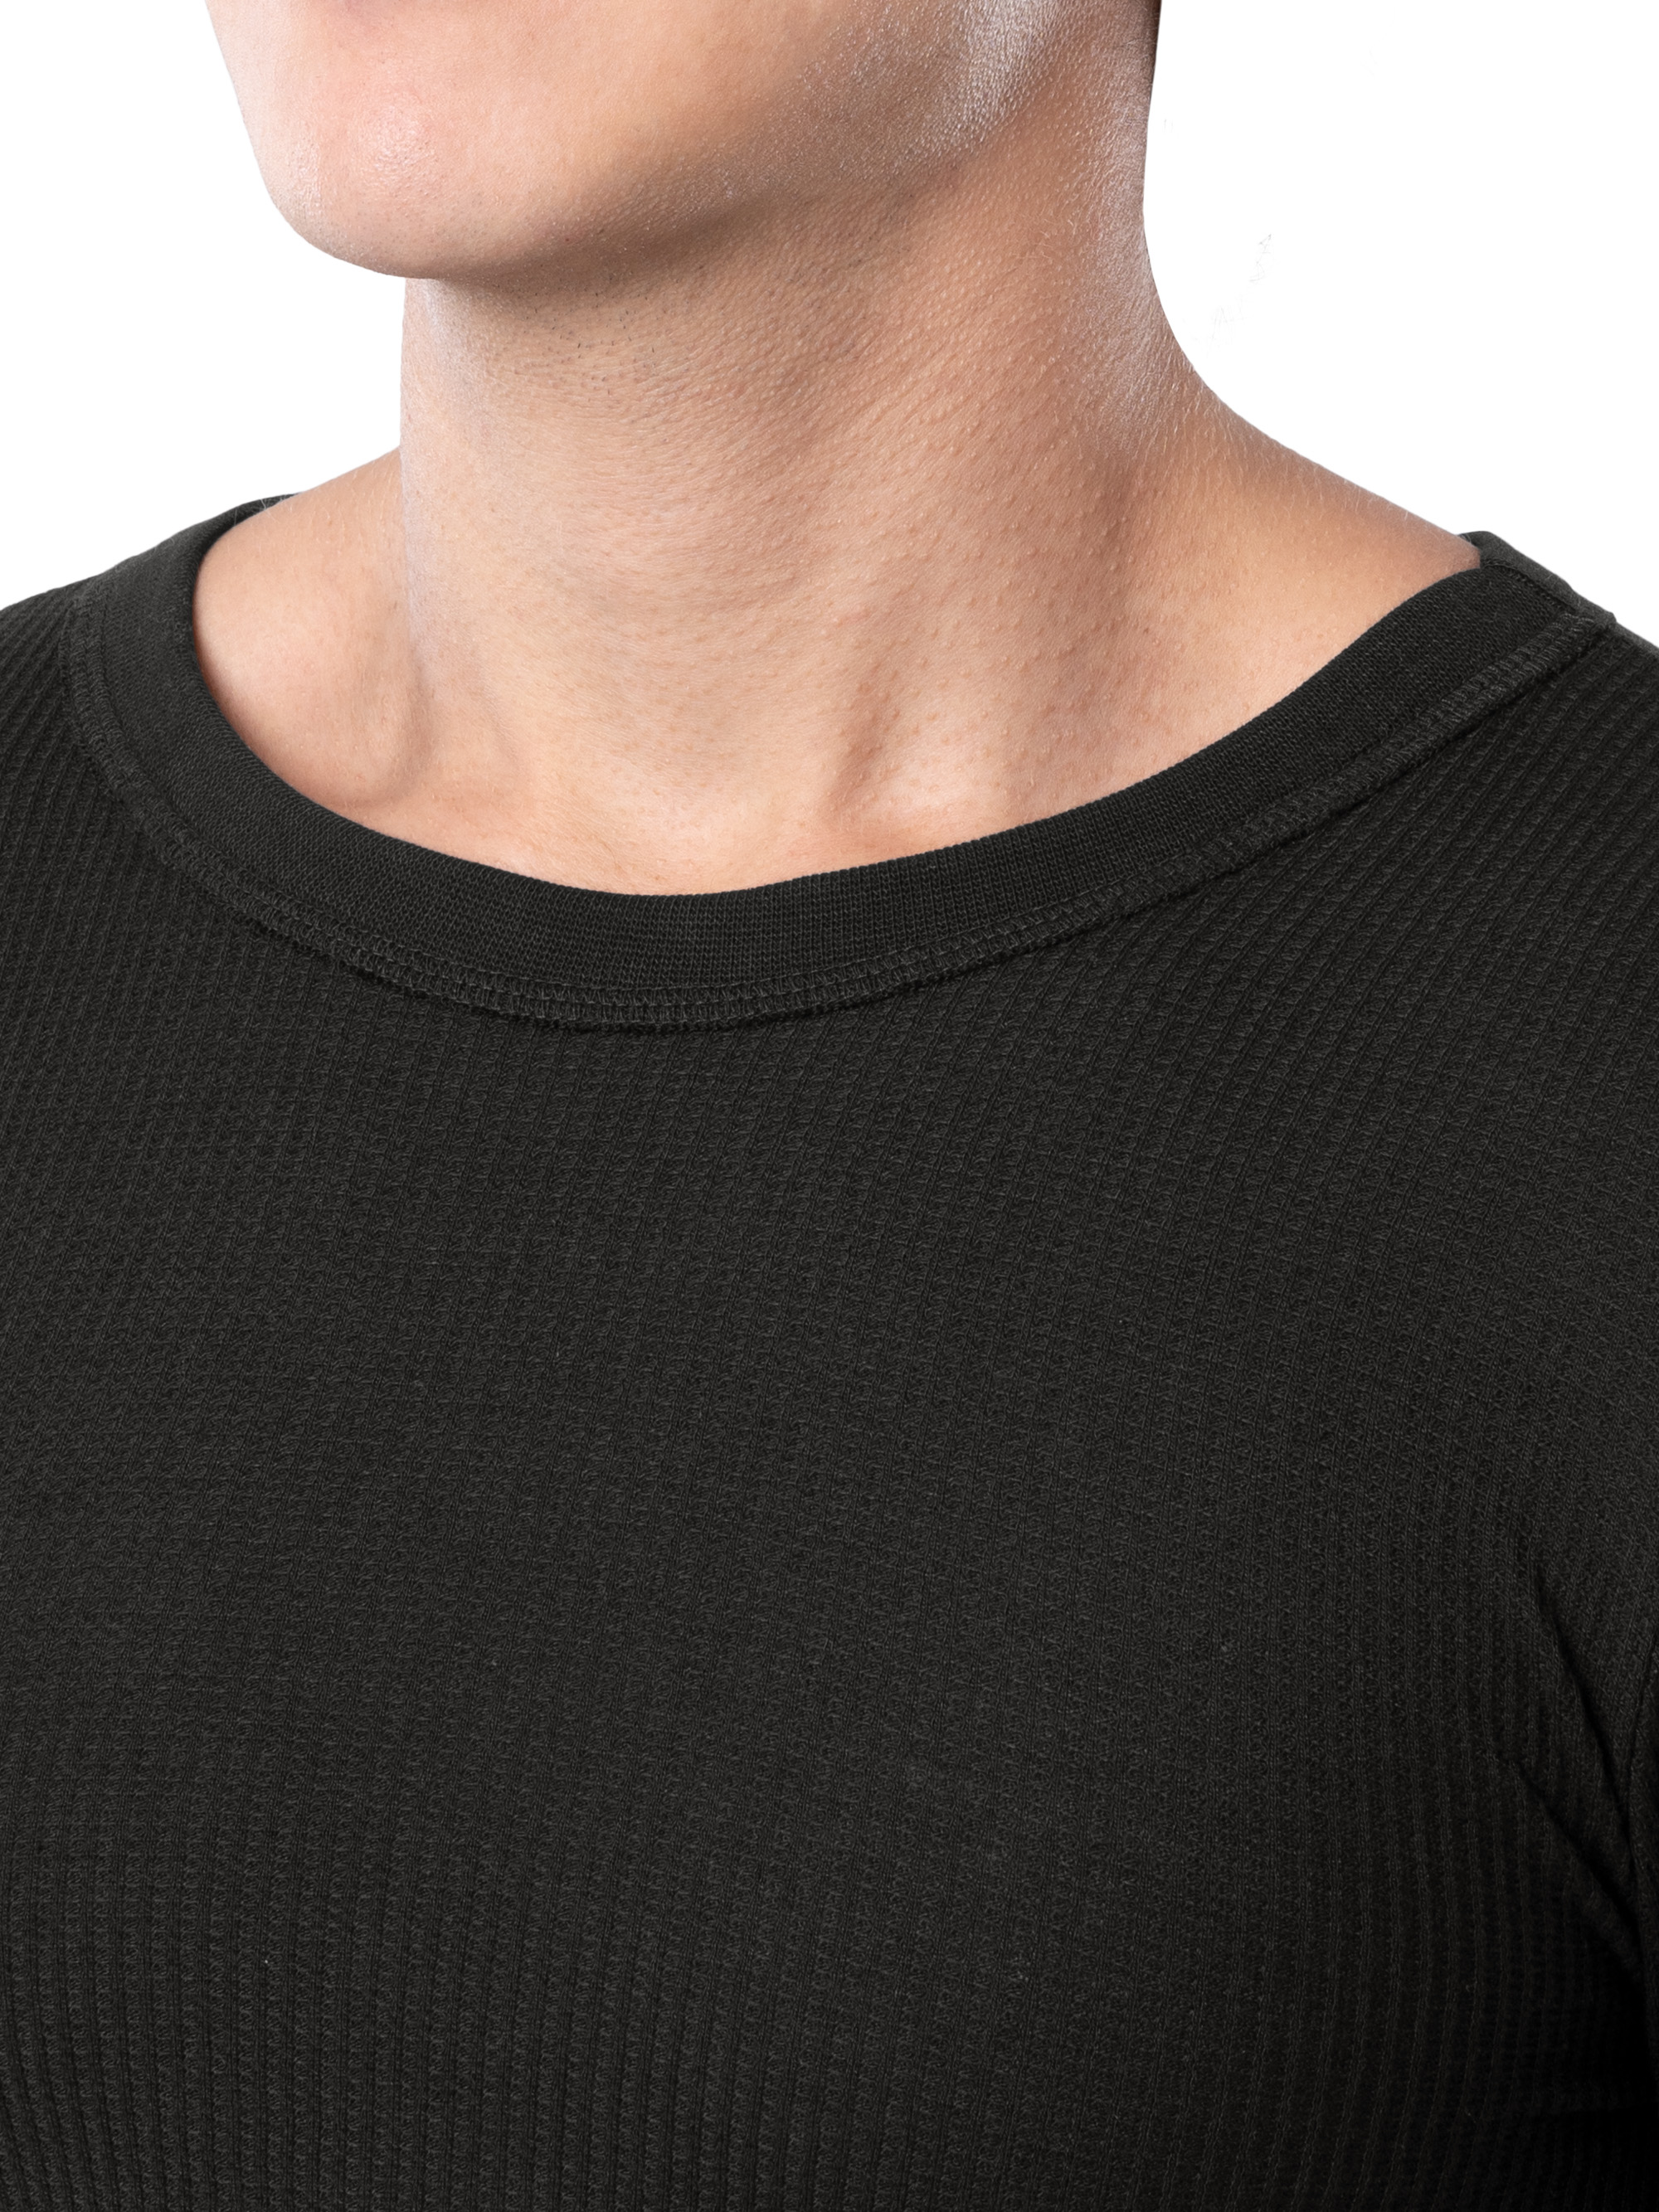 Fruit of The loom Men's Waffle Baselayer Crew Neck Thermal Top - image 4 of 8